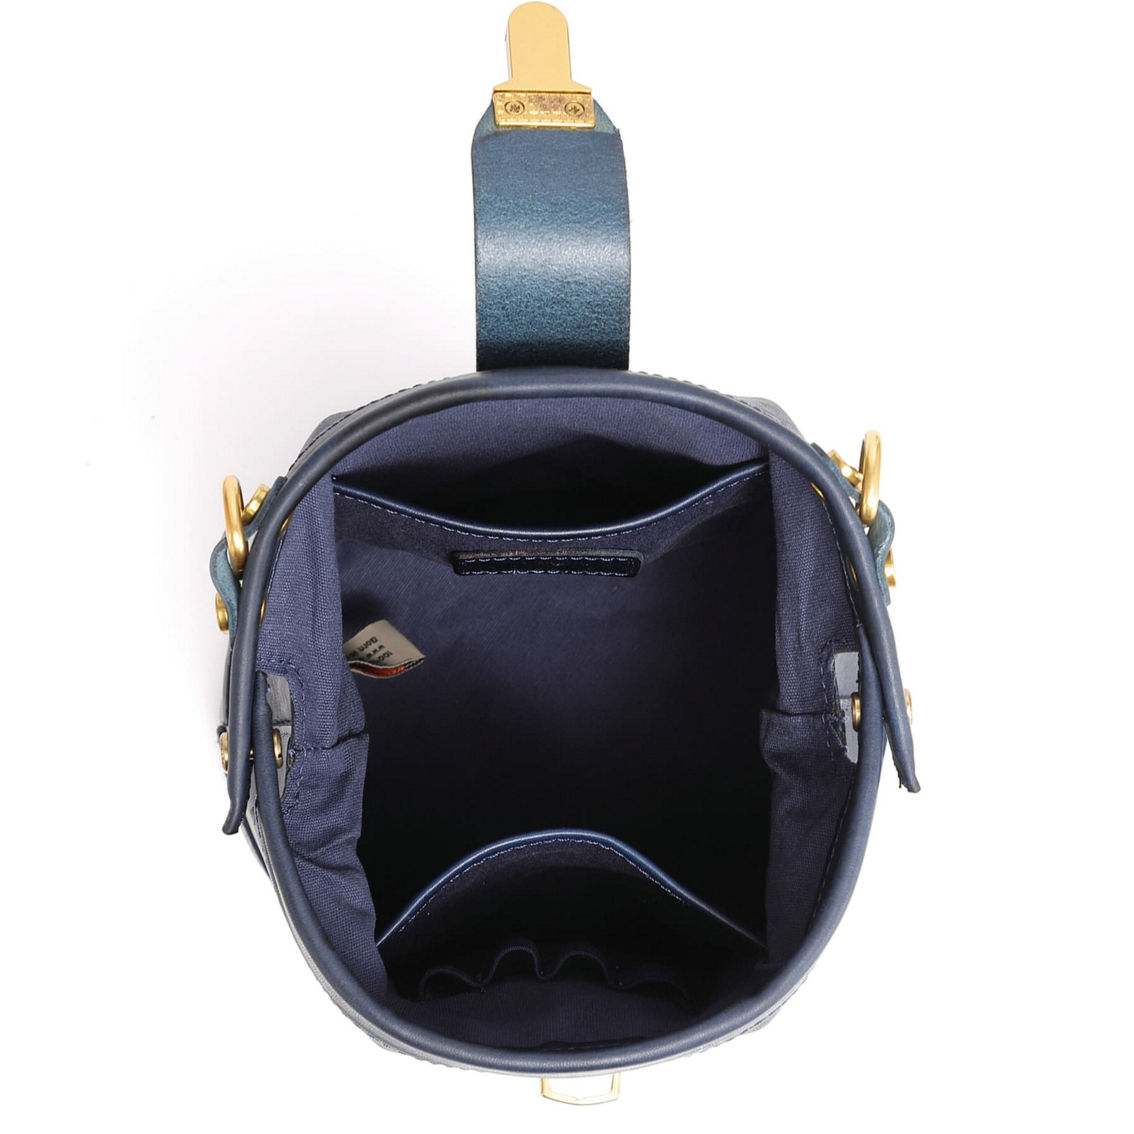 Old Trend Doctor Bucket Leather Crossbody - Image 4 of 5